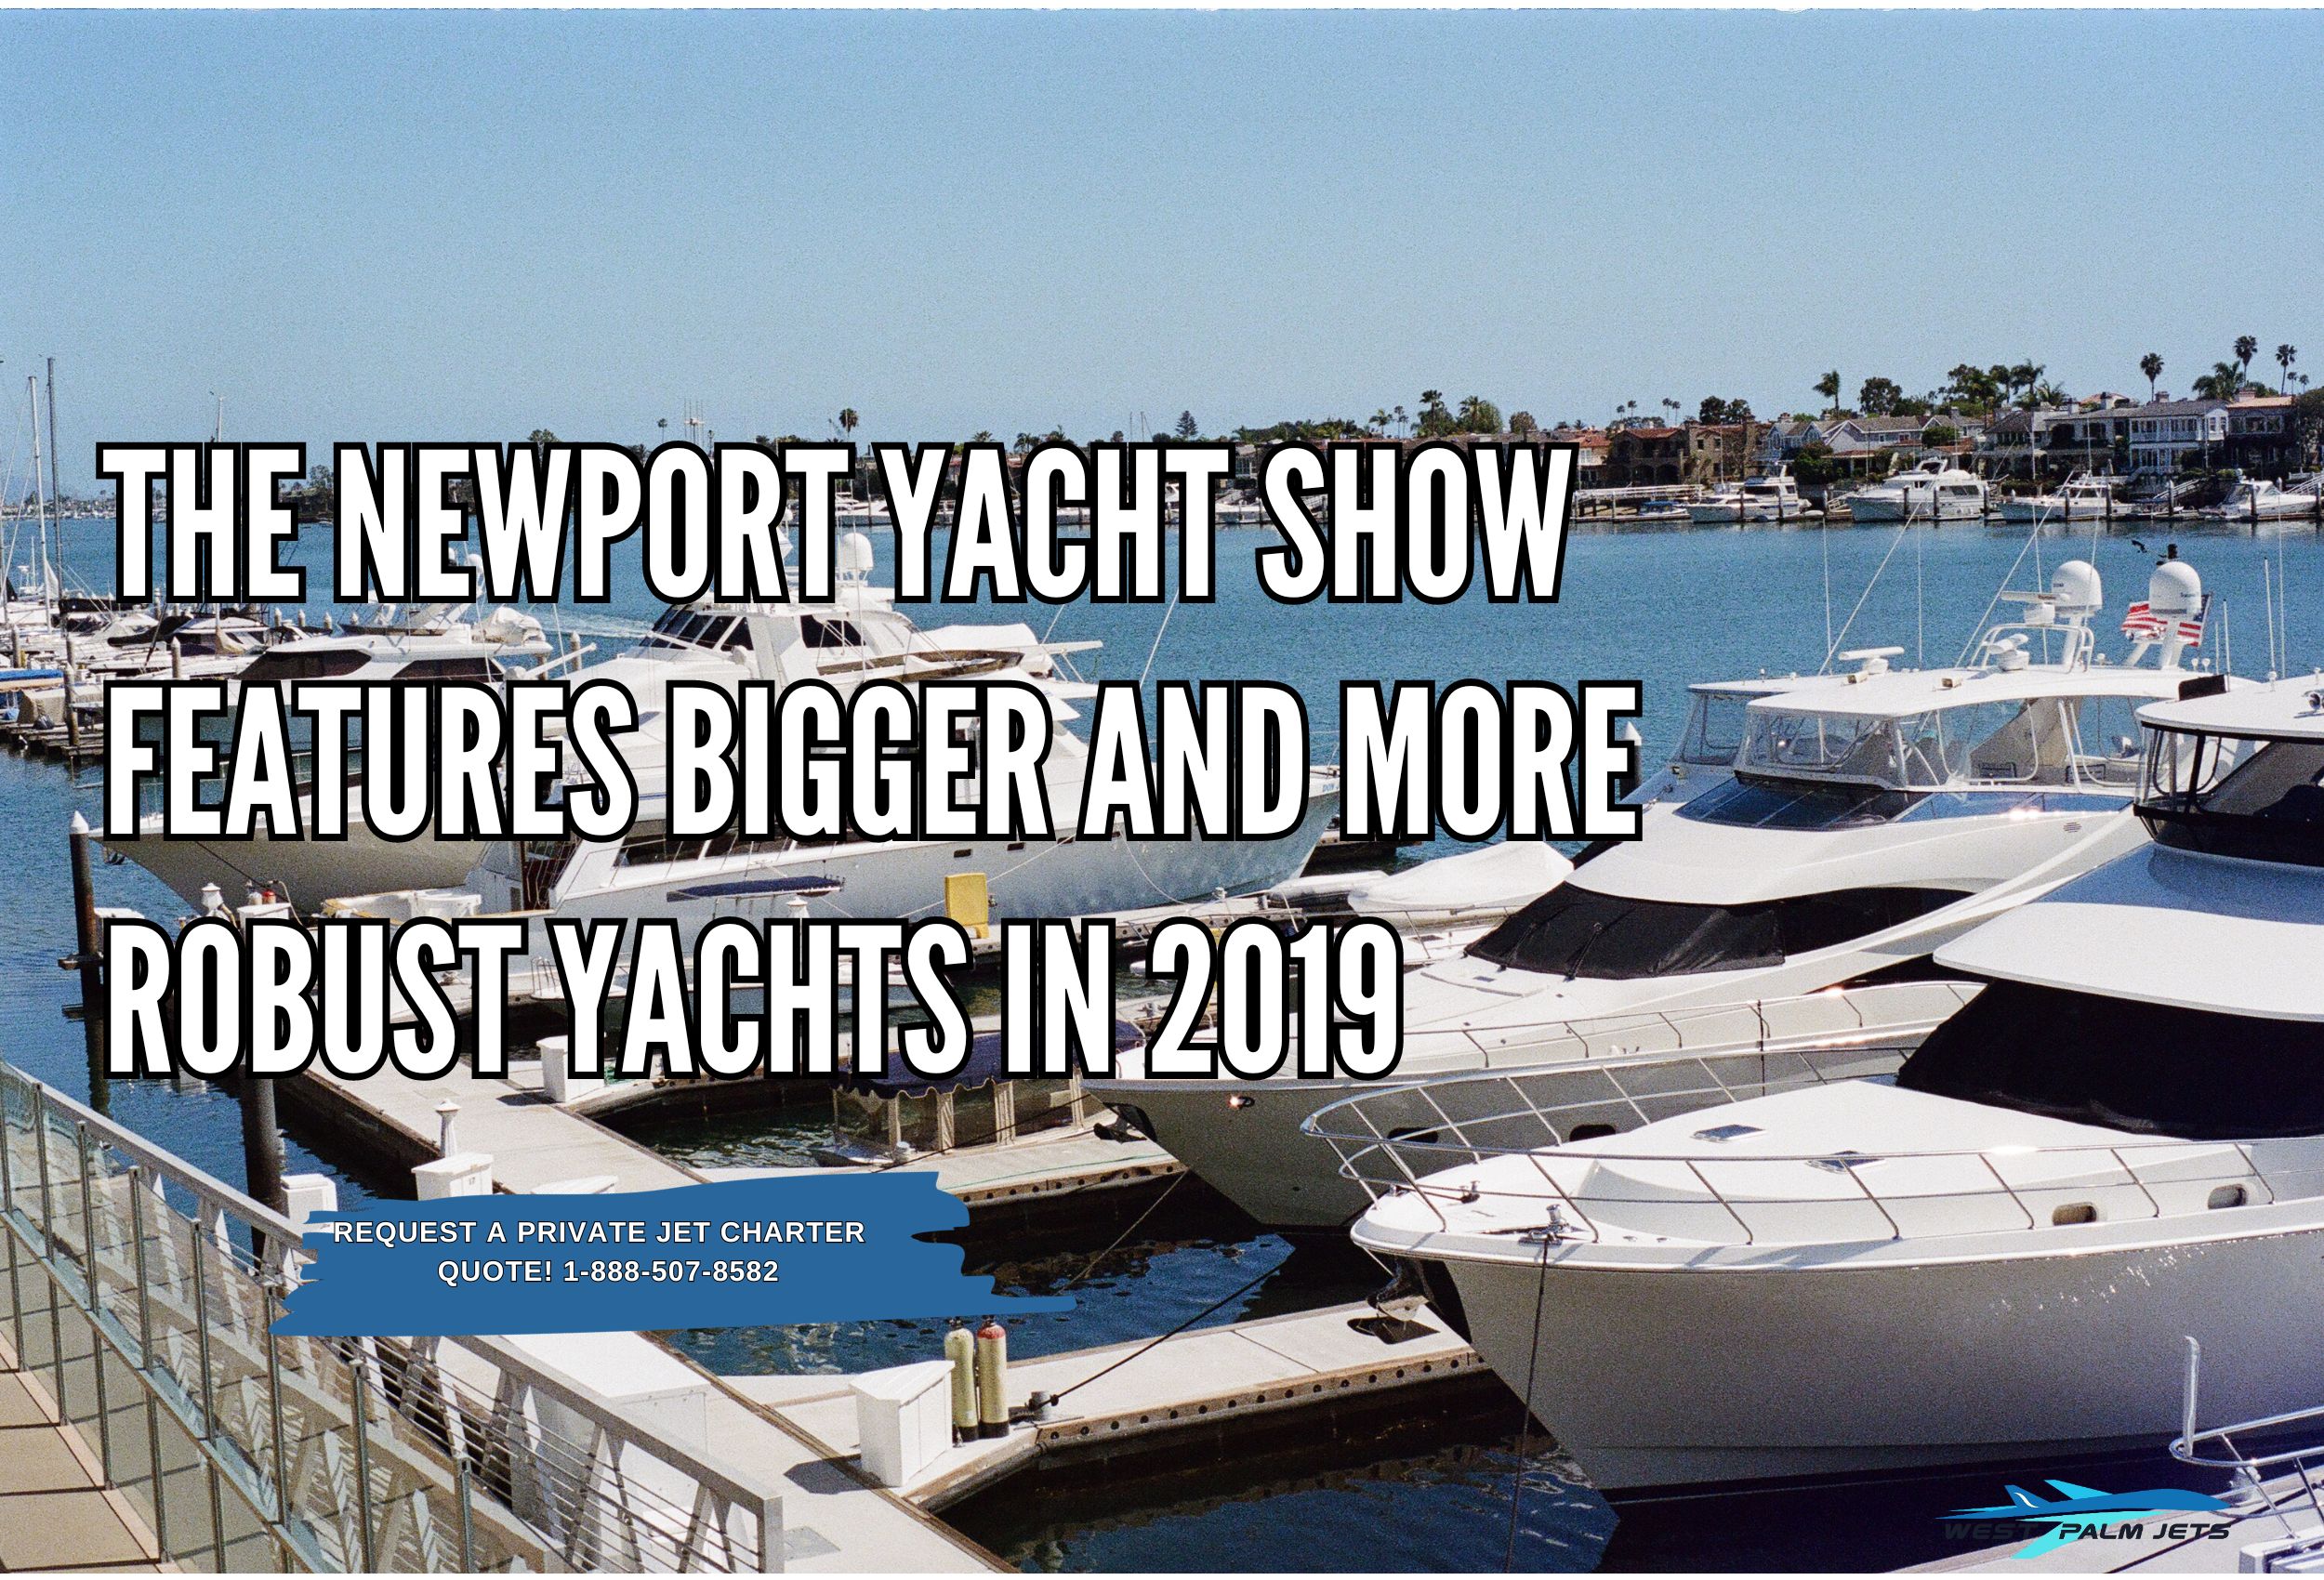 The Newport Yacht Show Features Bigger and More Robust Yachts in 2019